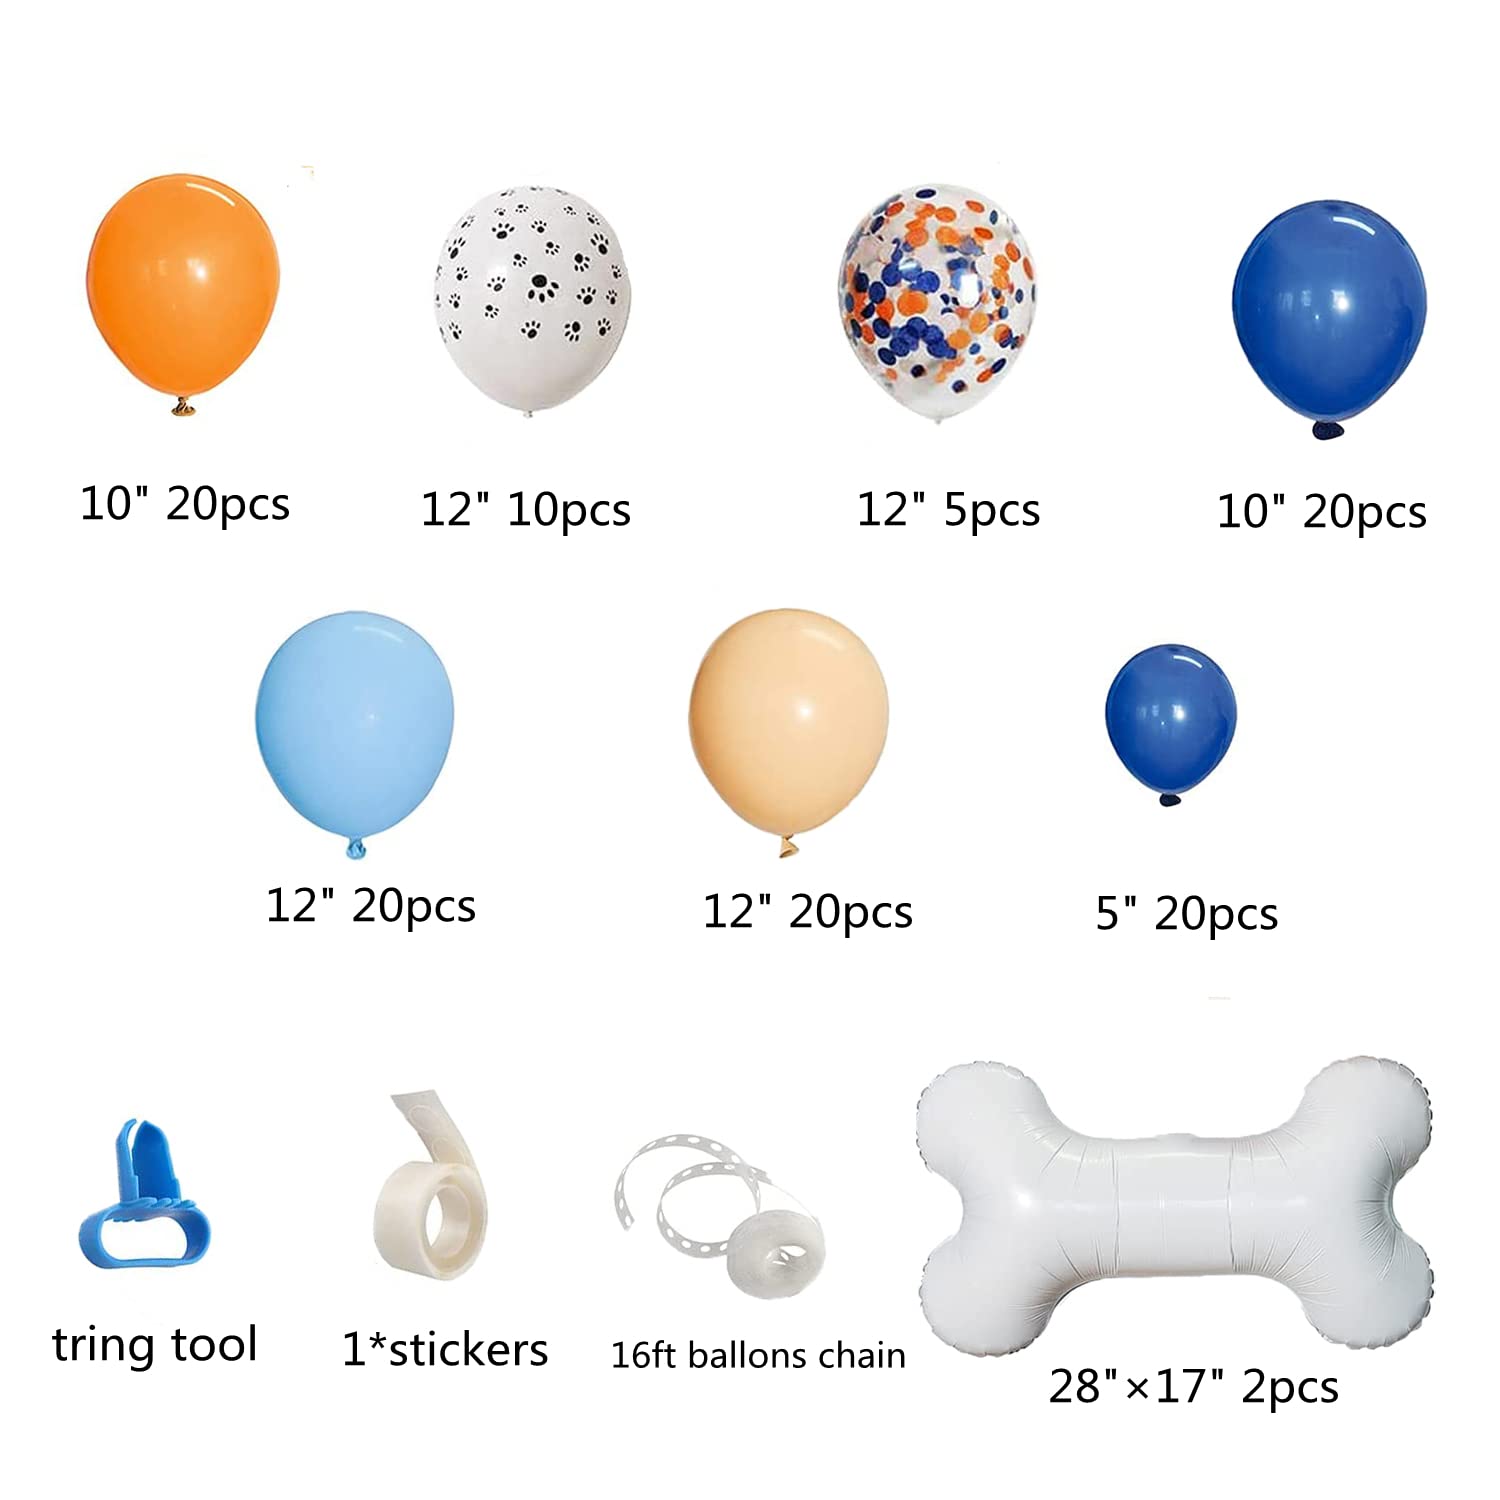 117Pack Theme Party Balloon Garland Kit, Blue and Orange Blush Dog Paw Balloon Arch with Bone Shaped Foil Balloons, Girl Boy Birthday Party Decorations